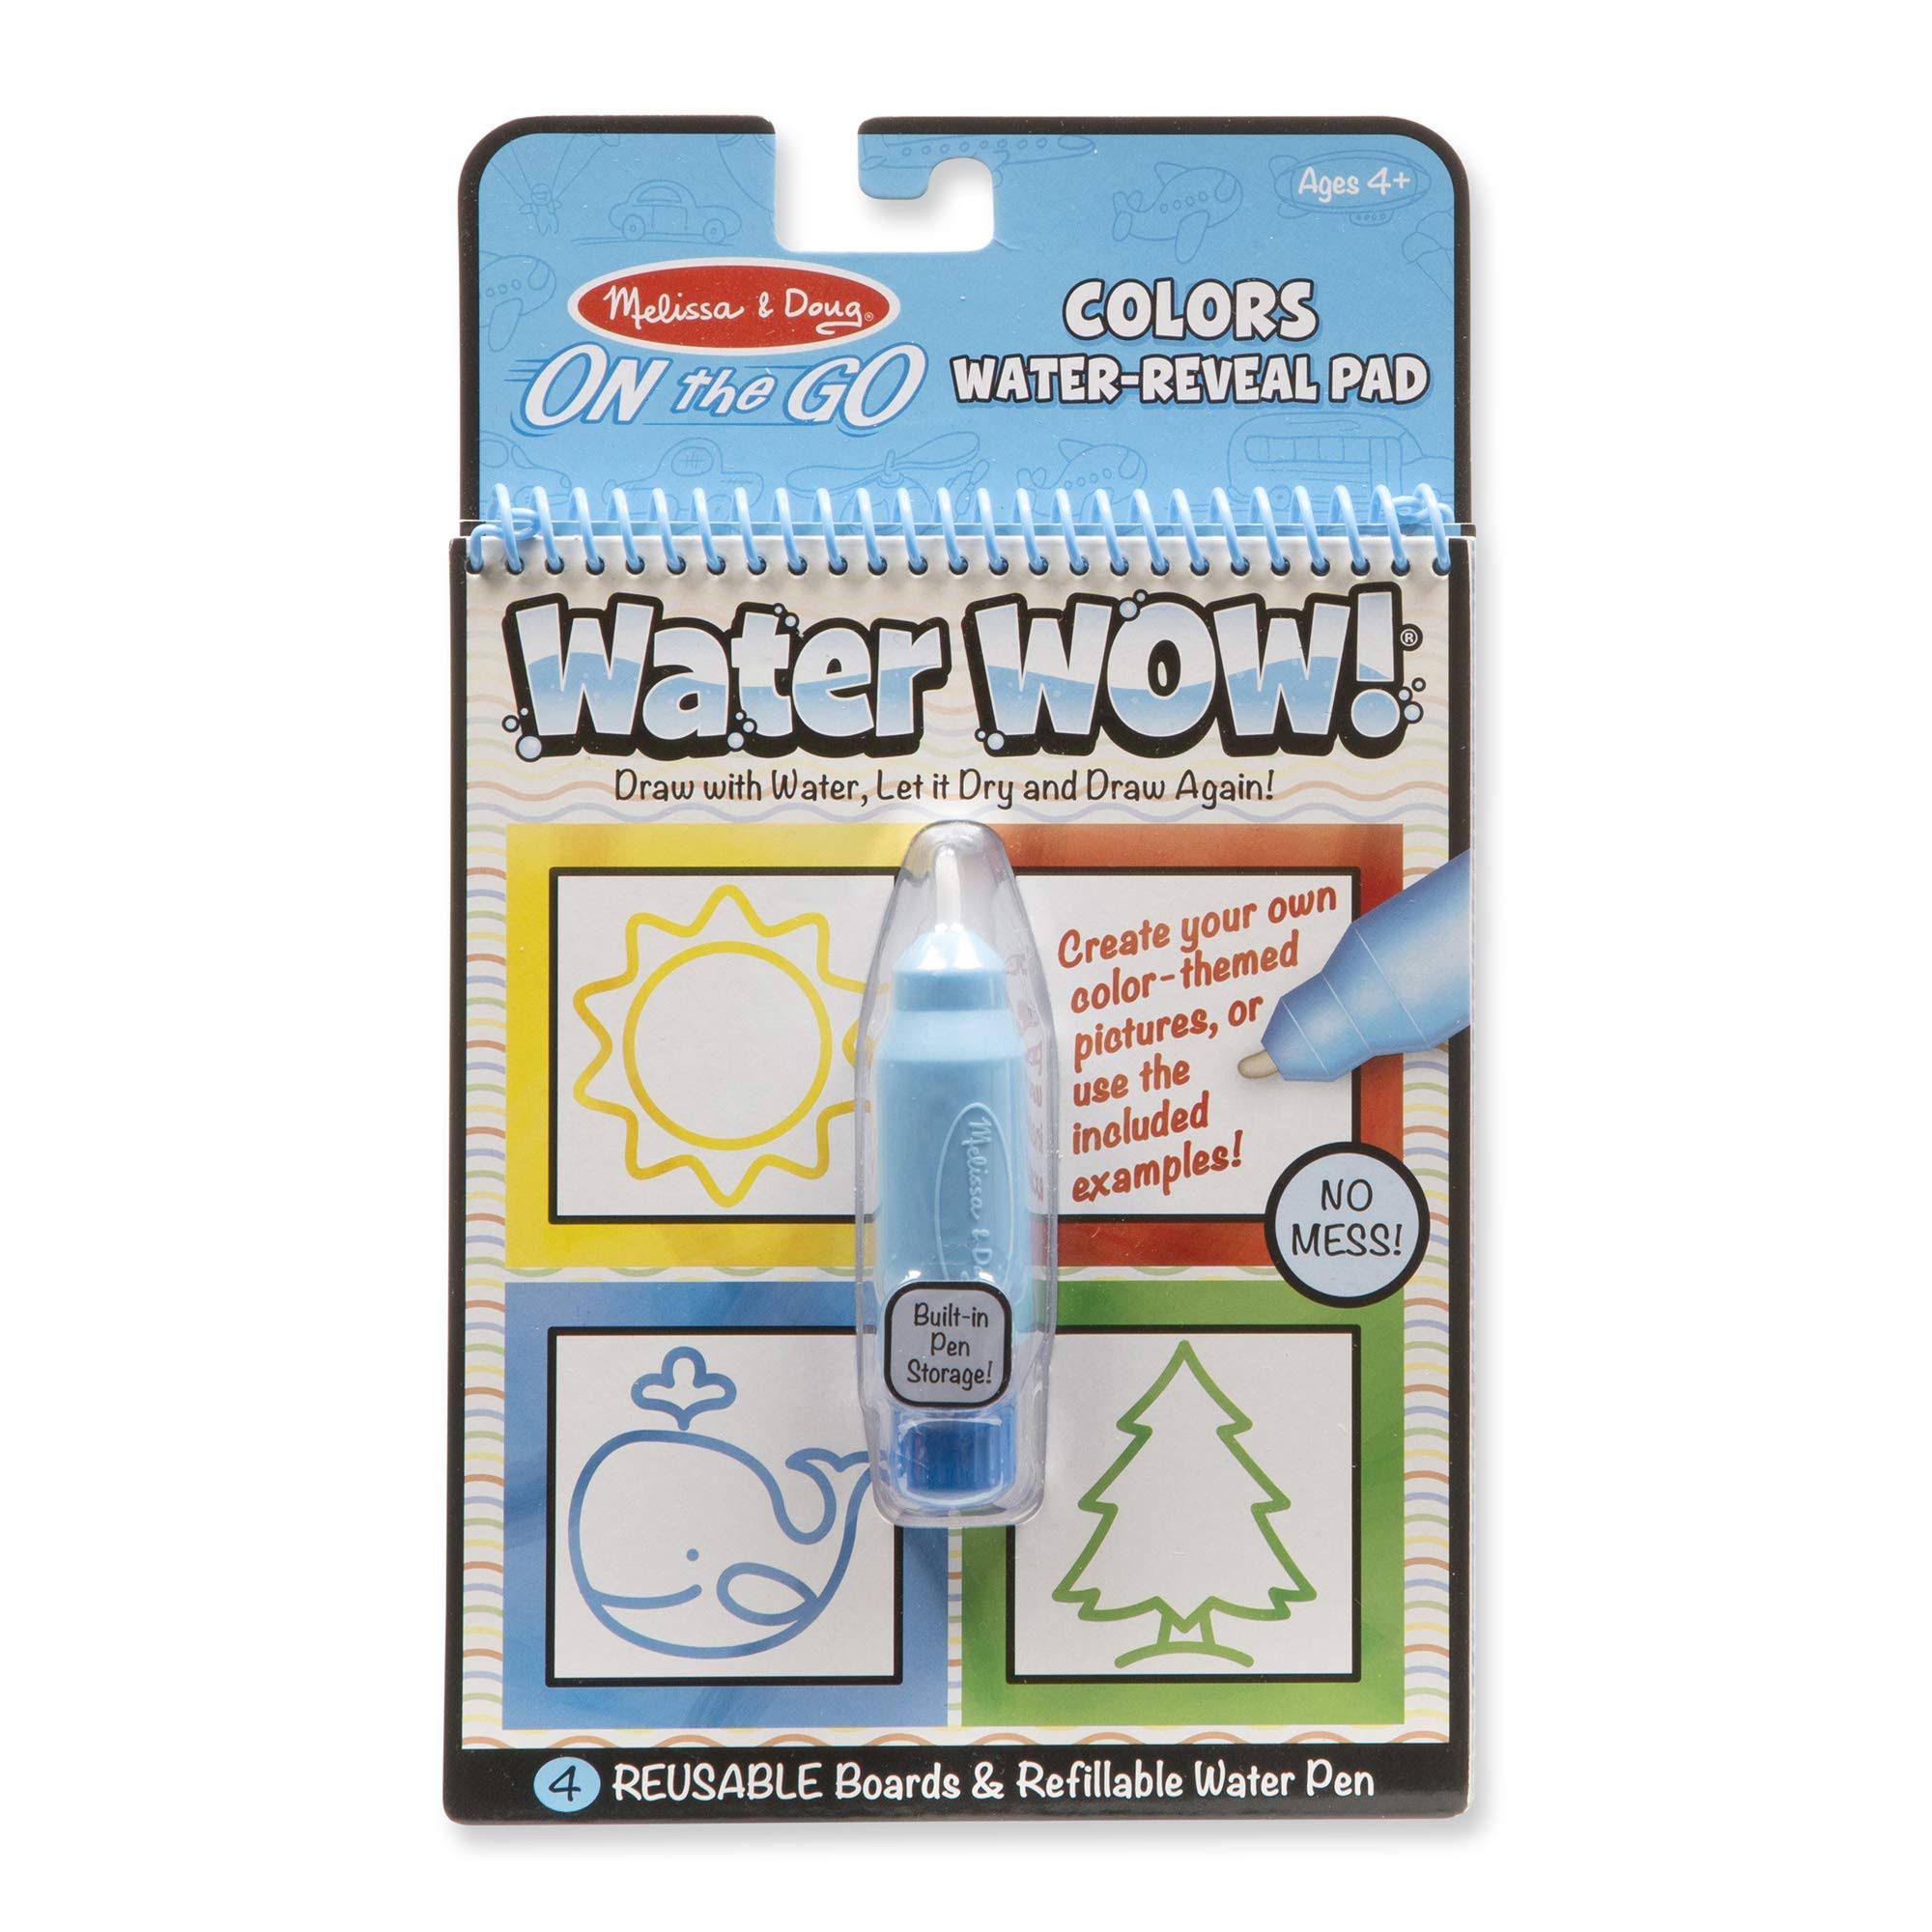 Melissa & Doug On The Go Water Wow! Activity Pad - Colors And Shapes